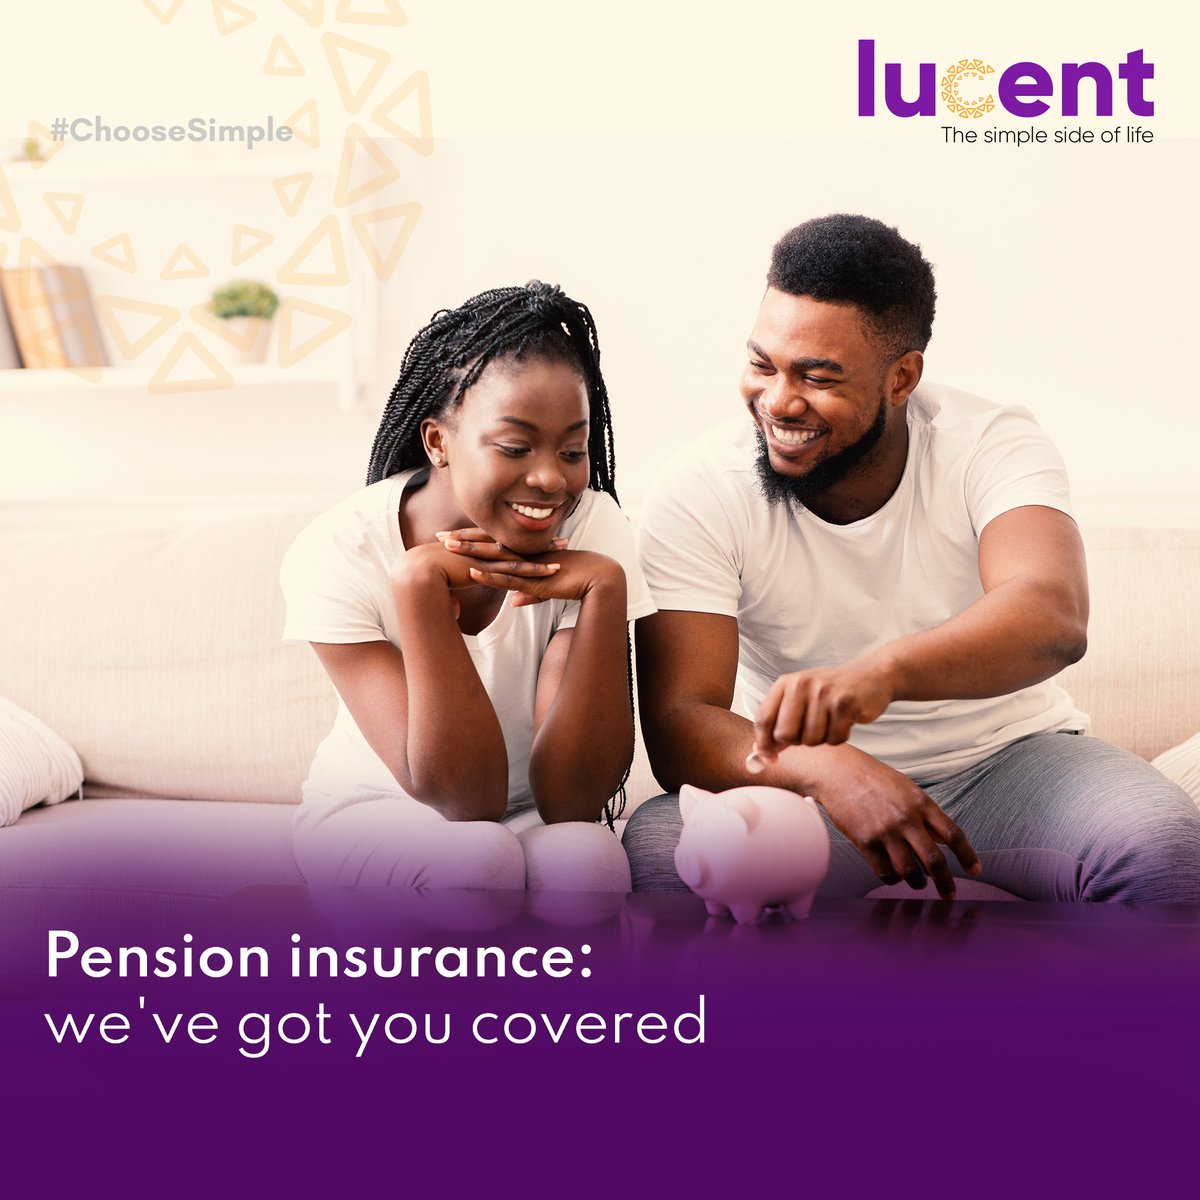 The sad truth about retirement is the reduction of income. Pension makes up for this by providing protection in form of lump sums and caters to dependents incase of death. Let us help you build an asset by calling 0709 527 000 to get sorted. #pensioninsurance #insurancebrokers